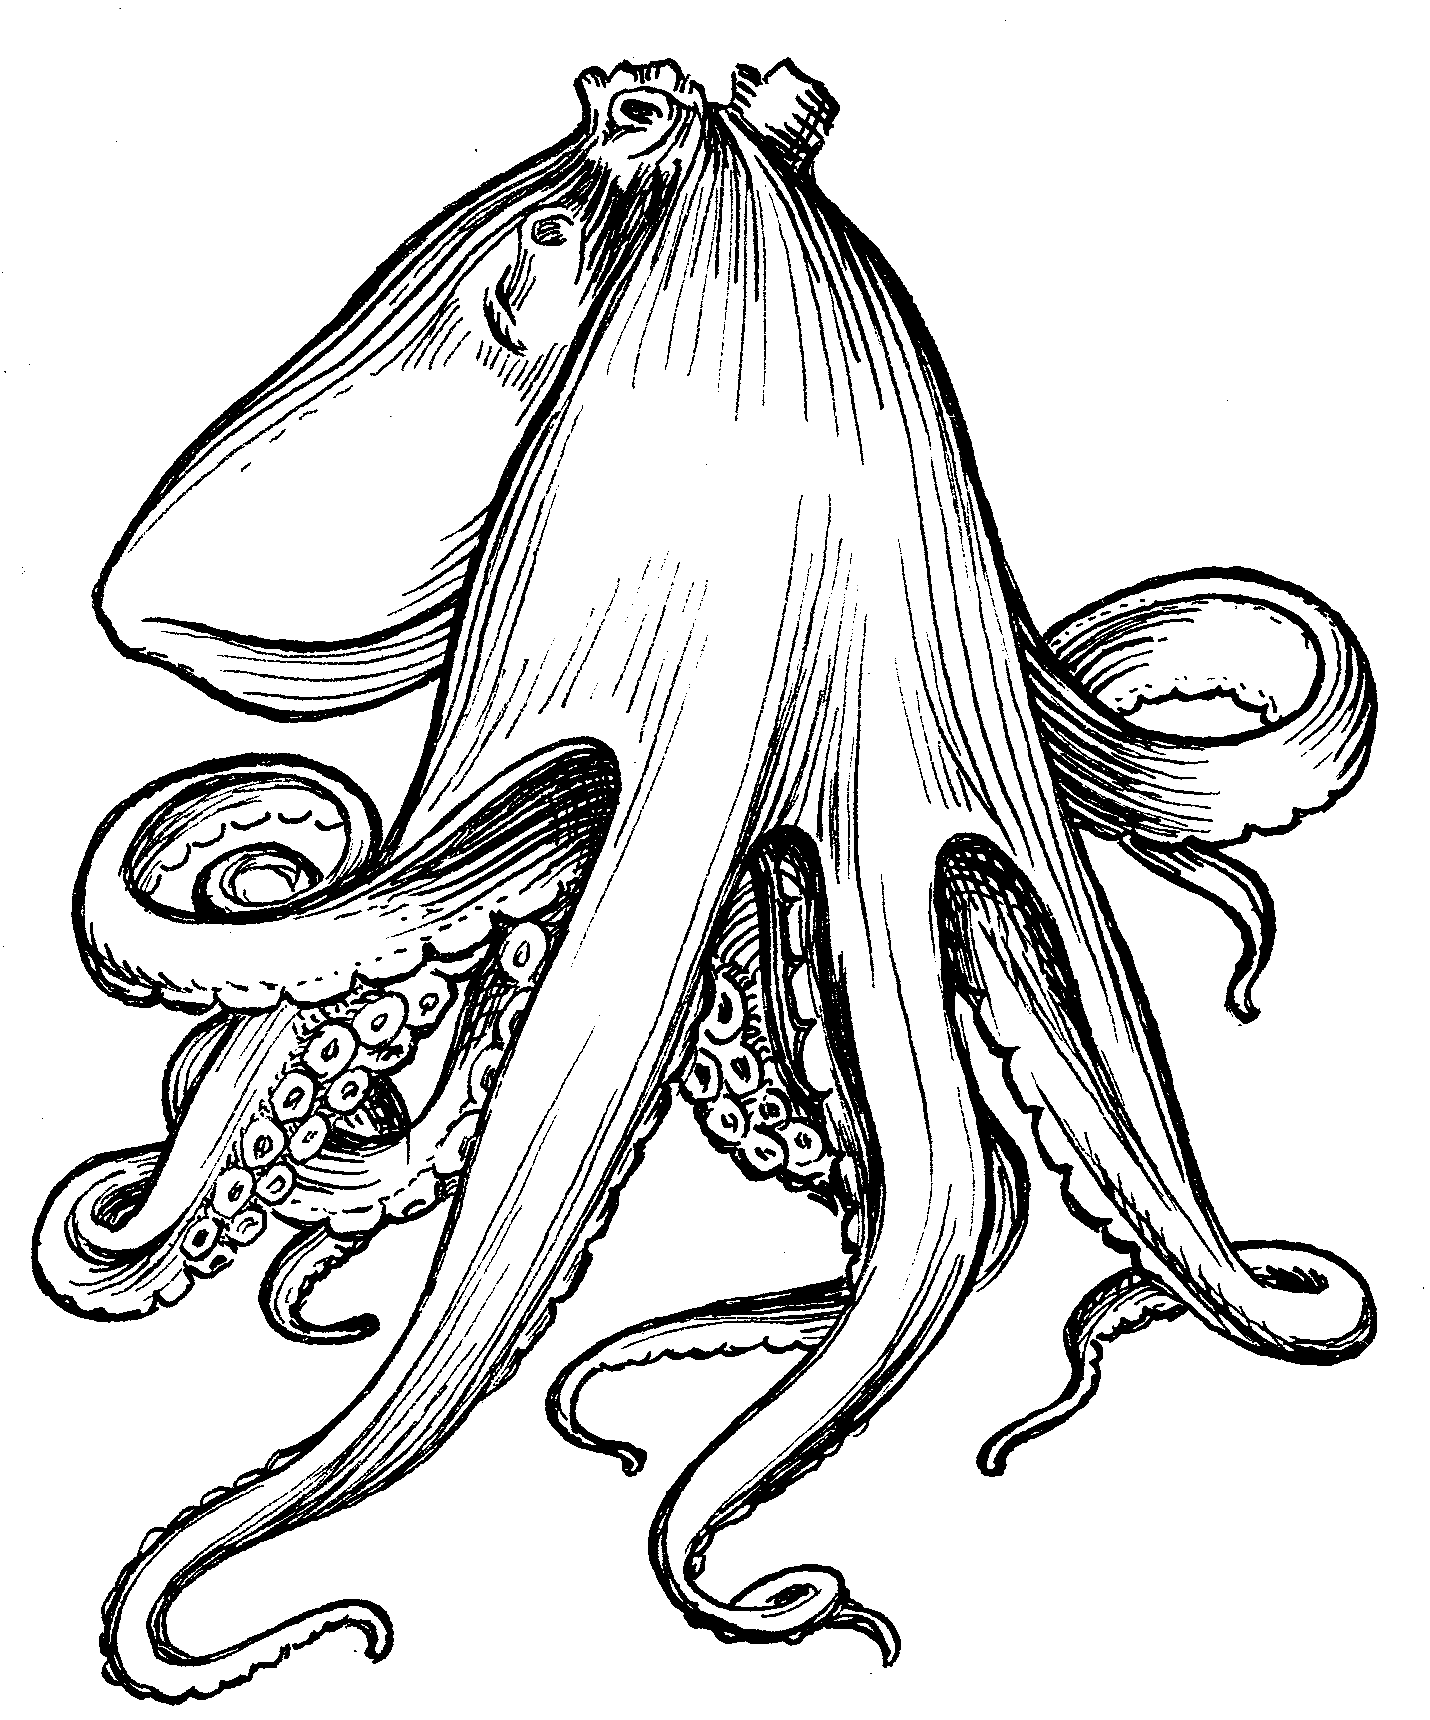 File:Octopus 2 (PSF).png - The Work of God's Children